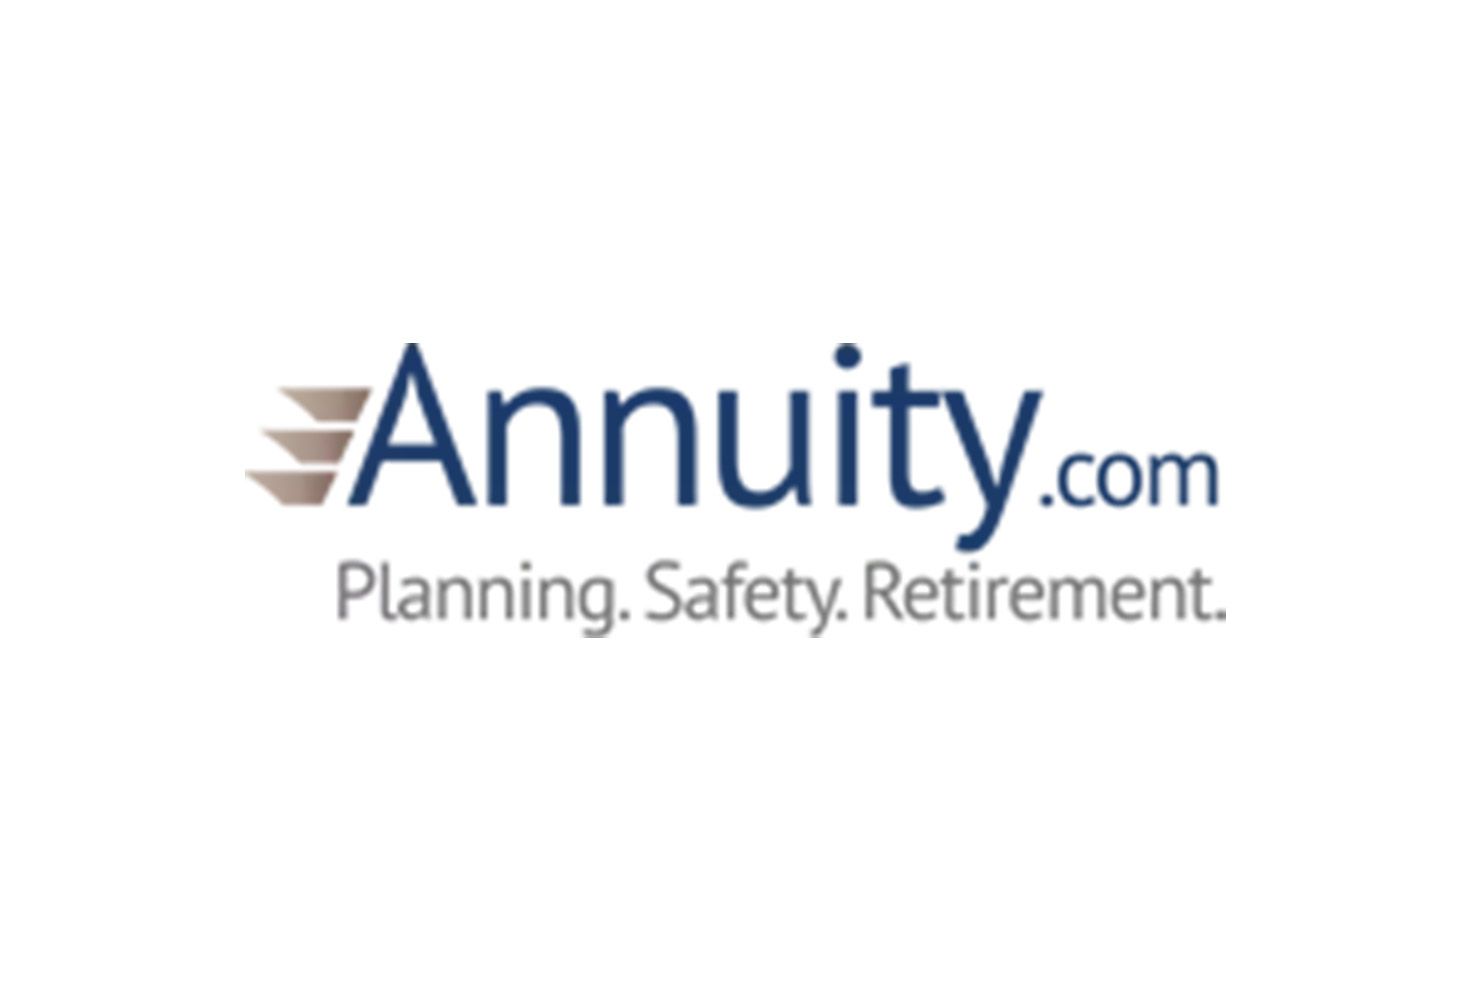 Annuity.com, Planning. Safety. Retirement.